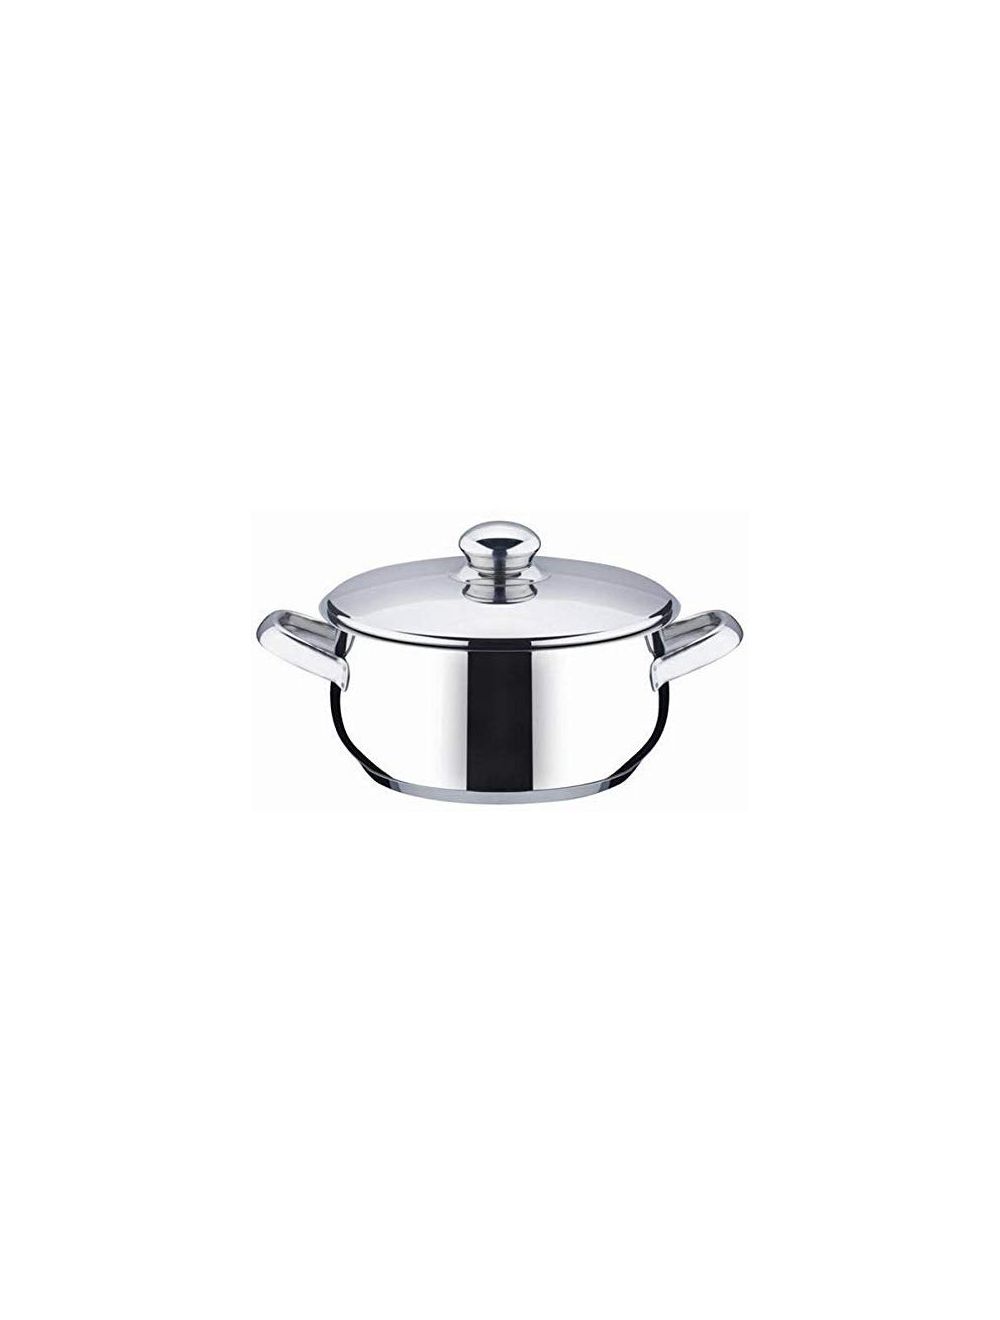 Tescoma Stainless Steel Casserole/Cooking Pot With Lid - Silver, 20cm